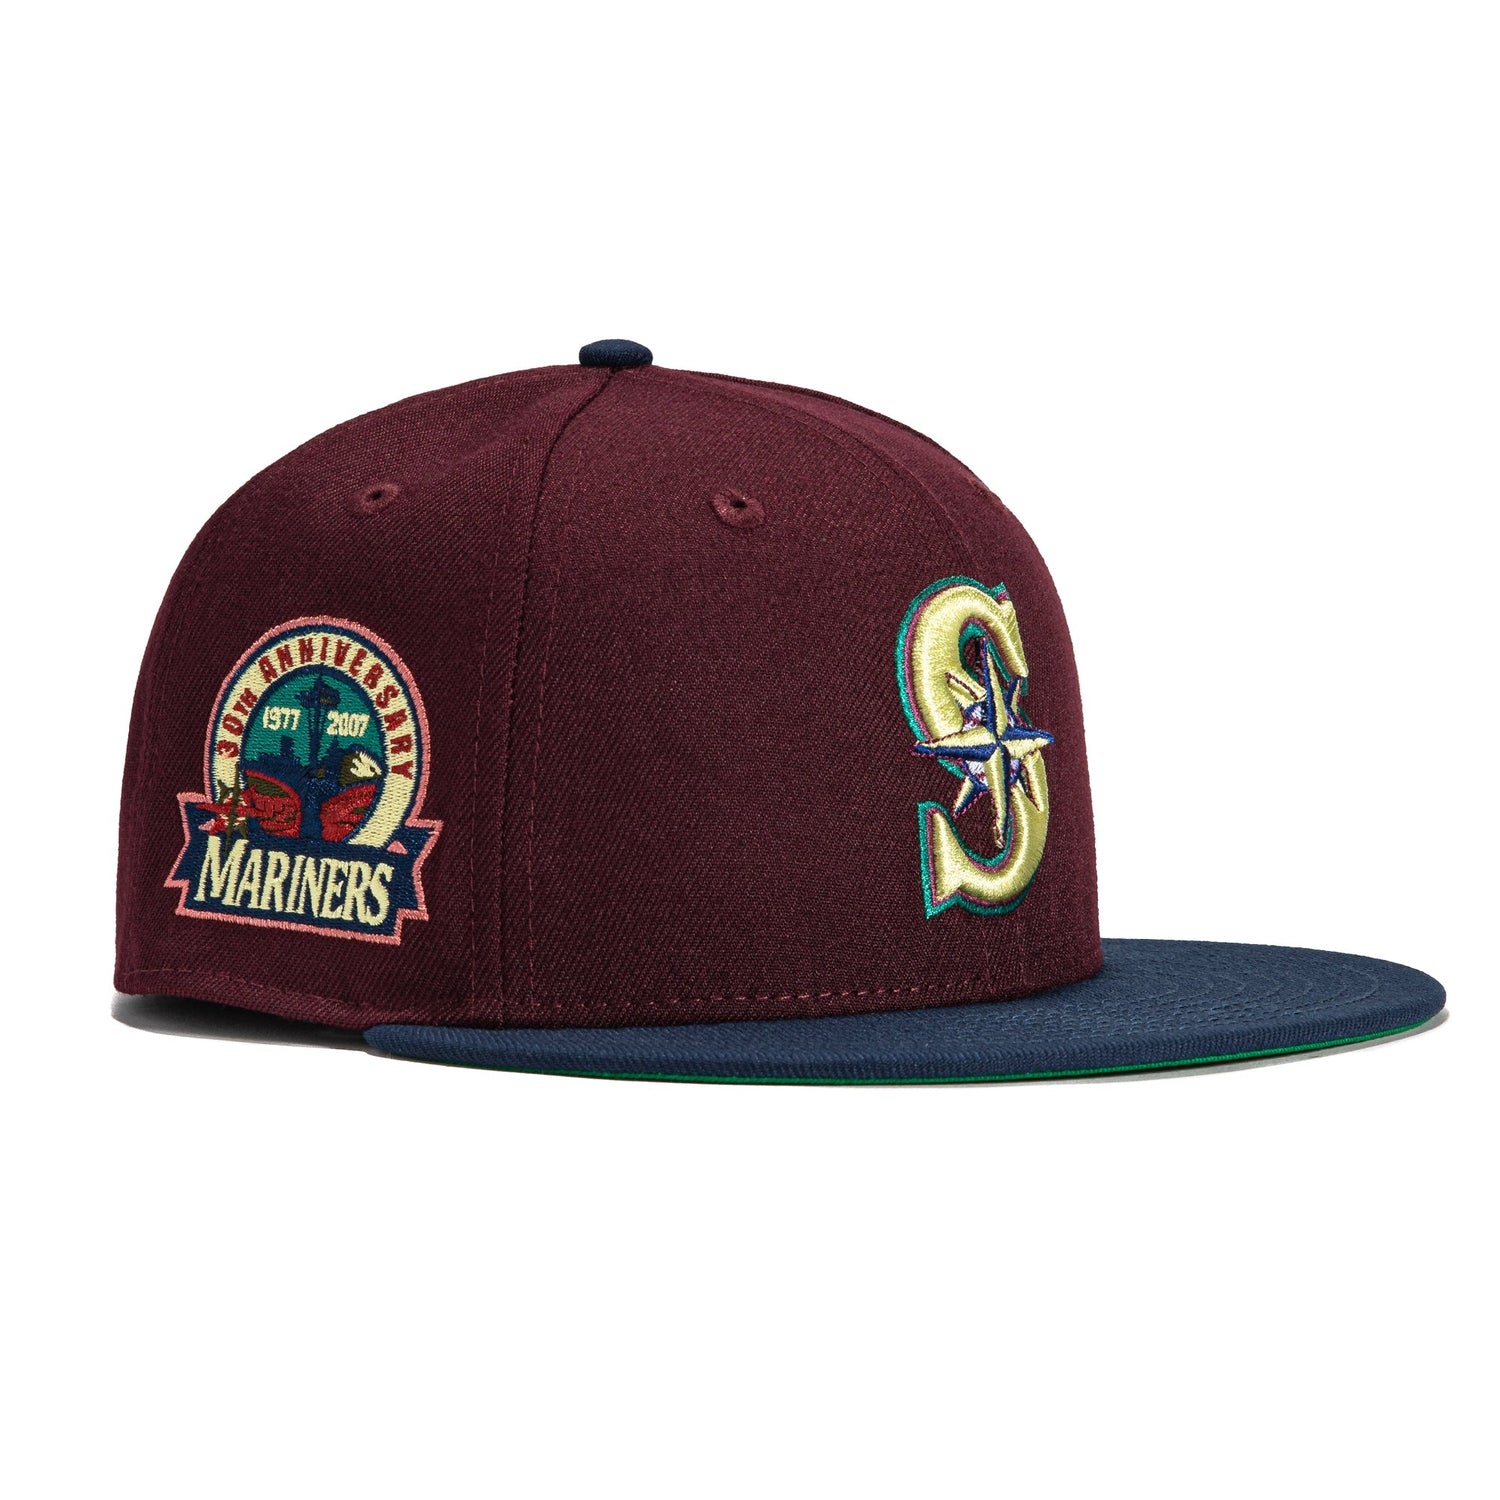 New Era 59FIFTY Seattle Mariners 30th Anniversary Patch Hat - Maroon, Navy Maroon/Navy / 7 7/8